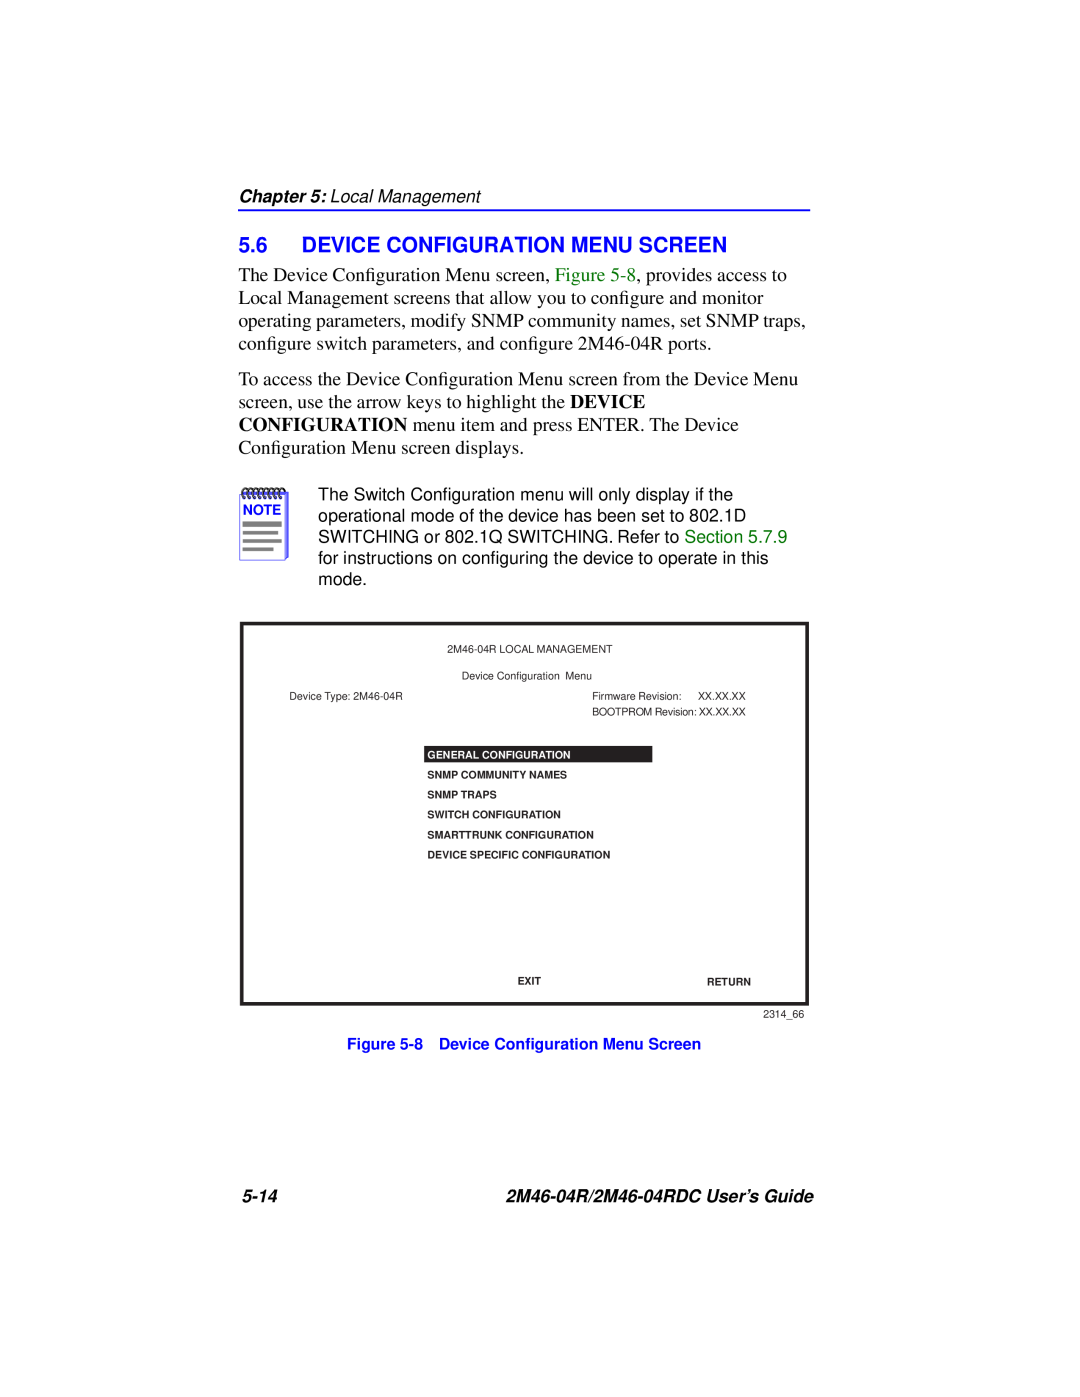 Cabletron Systems pmn manual Device Configuration Menu Screen, 8 Device Conﬁguration Menu Screen 